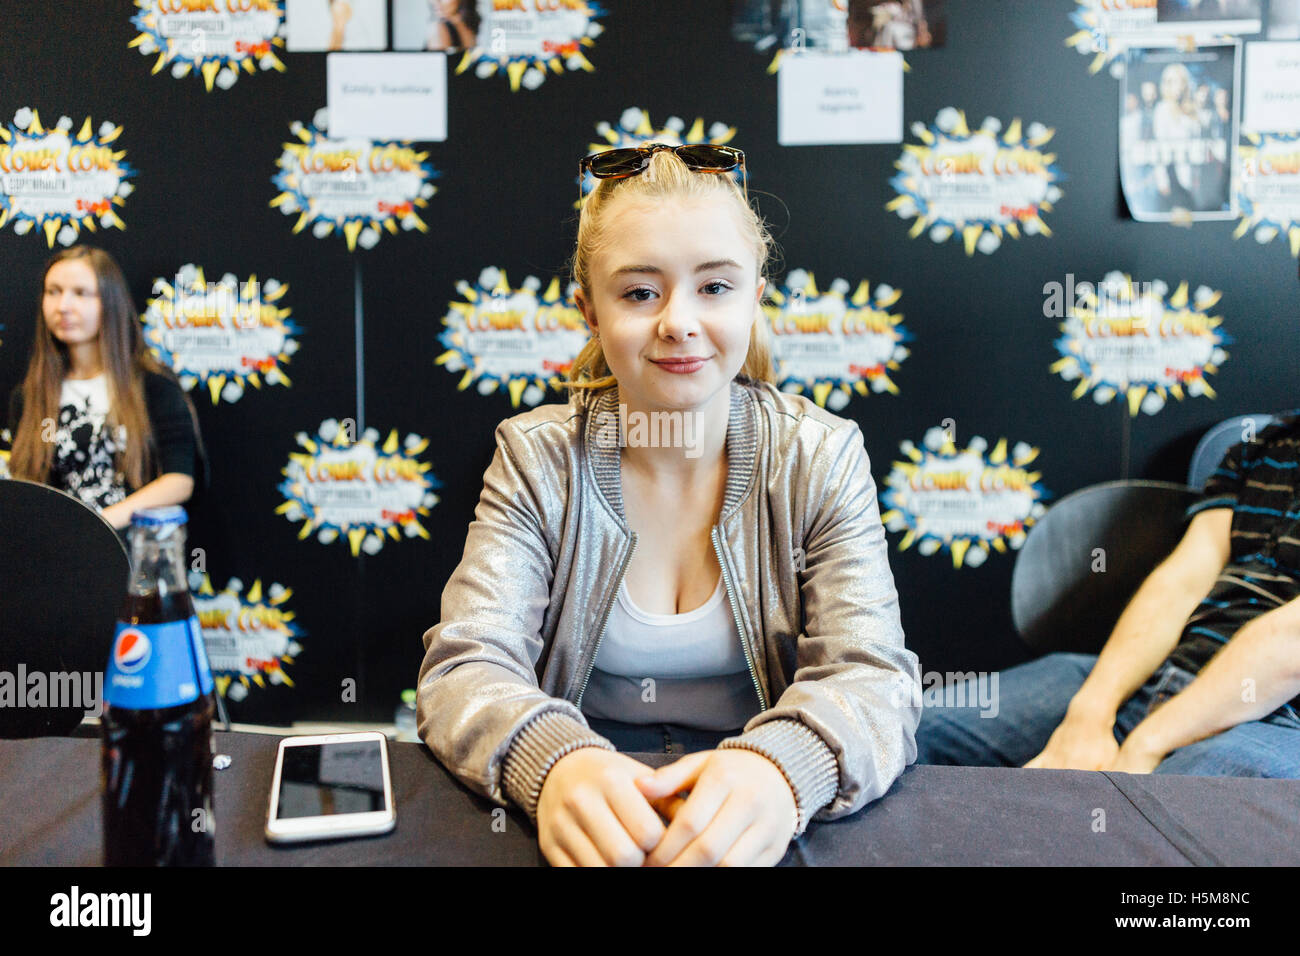 Kerry Ingram, British actress known from the HBO series ‘Game of Thrones’, attends a fan meeting at Comic Con Copenhagen 2016. Stock Photo